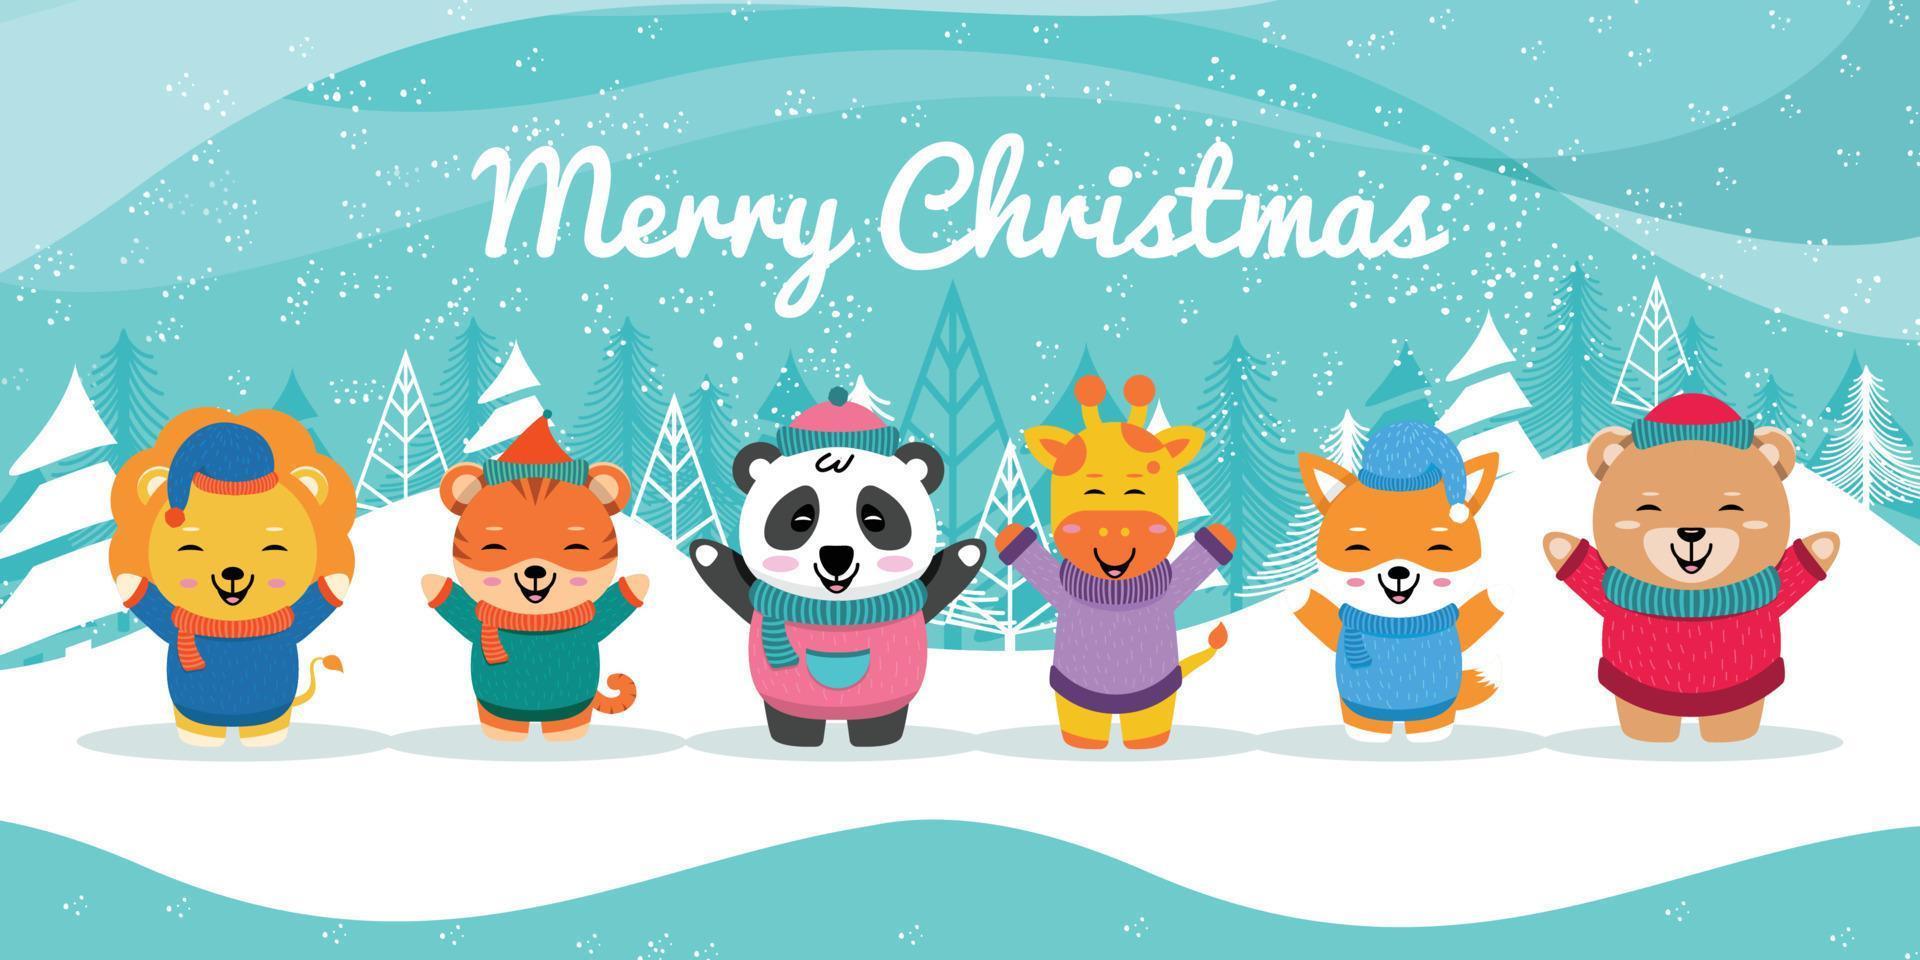 Illustrations of Cute Animals in the Snow, for Christmas Greetings, Can be Used for Greeting Cards, Banners, Posters, or Other Design Needs. vector